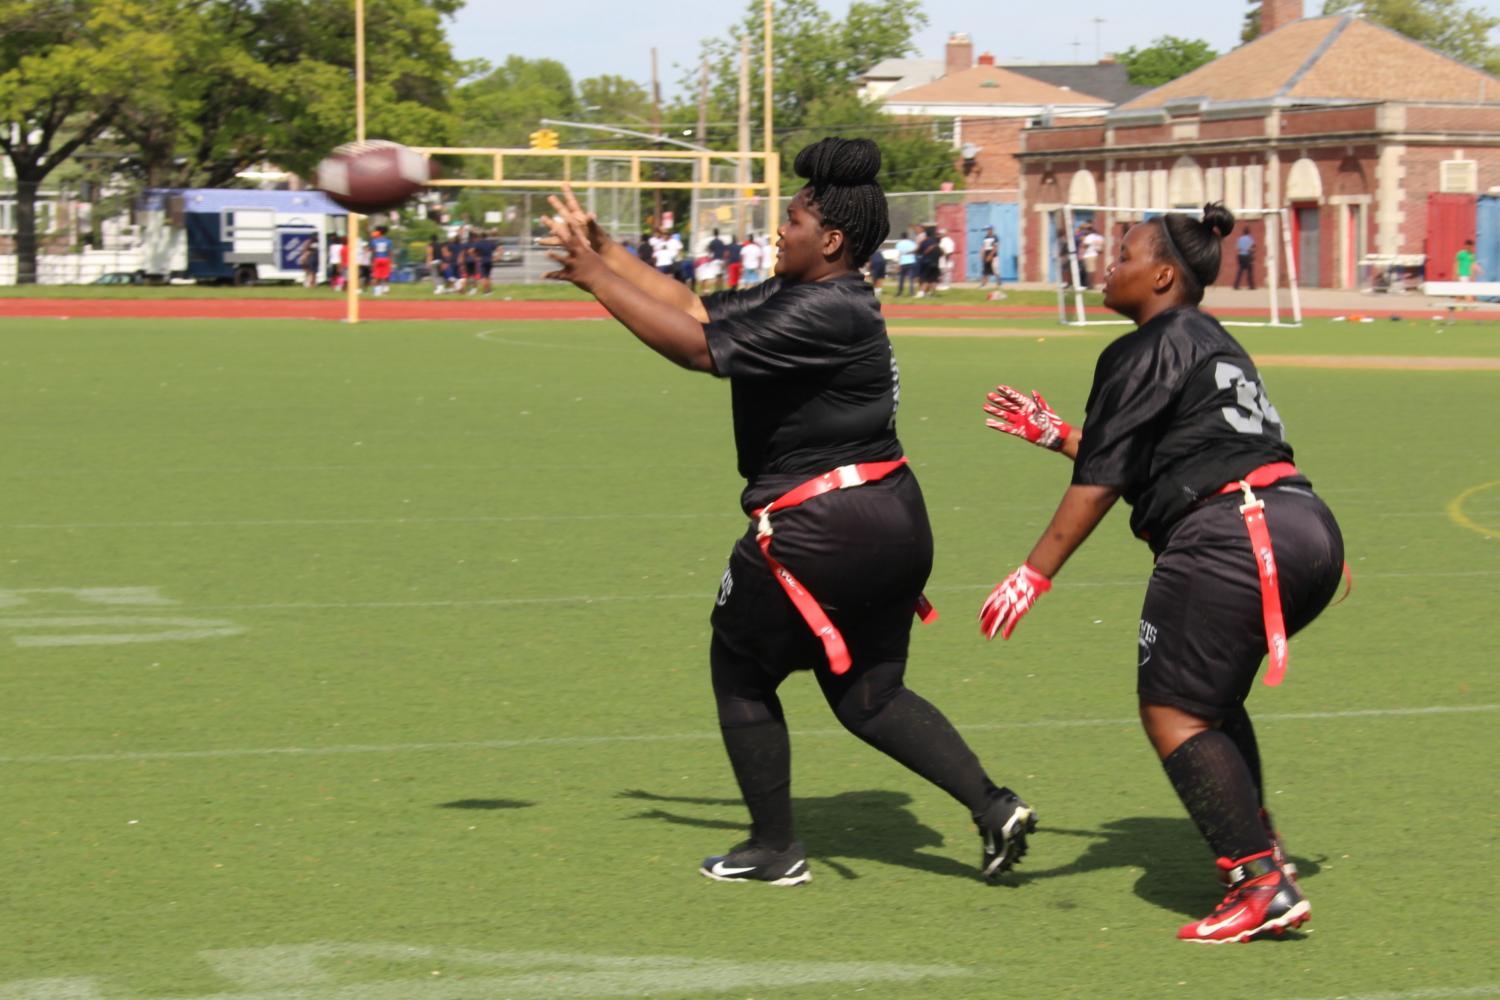 Paola Green and Christina Walker Robinson, both students at Francis Lewis High School, play in a flag football game